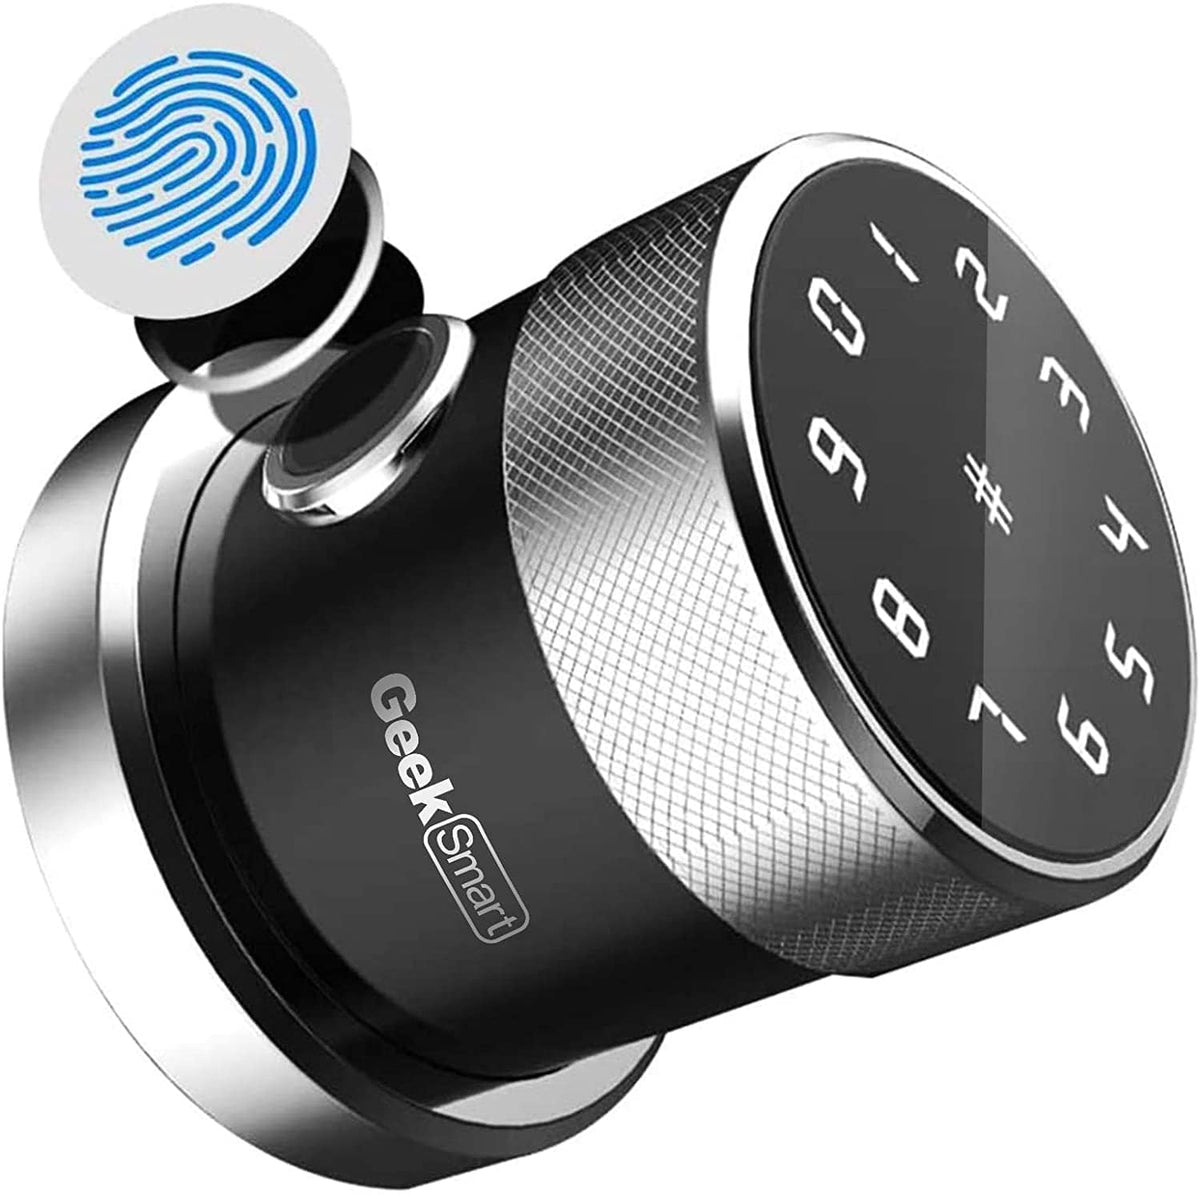 SmartTechShopping Fingerprint Lock / Silver Geek Smart Door Lock - Keyless Fingerprint and Touchscreen Digital Door Lock, Secure Bluetooth, Easy Install, Great for Airbnb, Hotels and Offices, Homes, Apartments- Silver